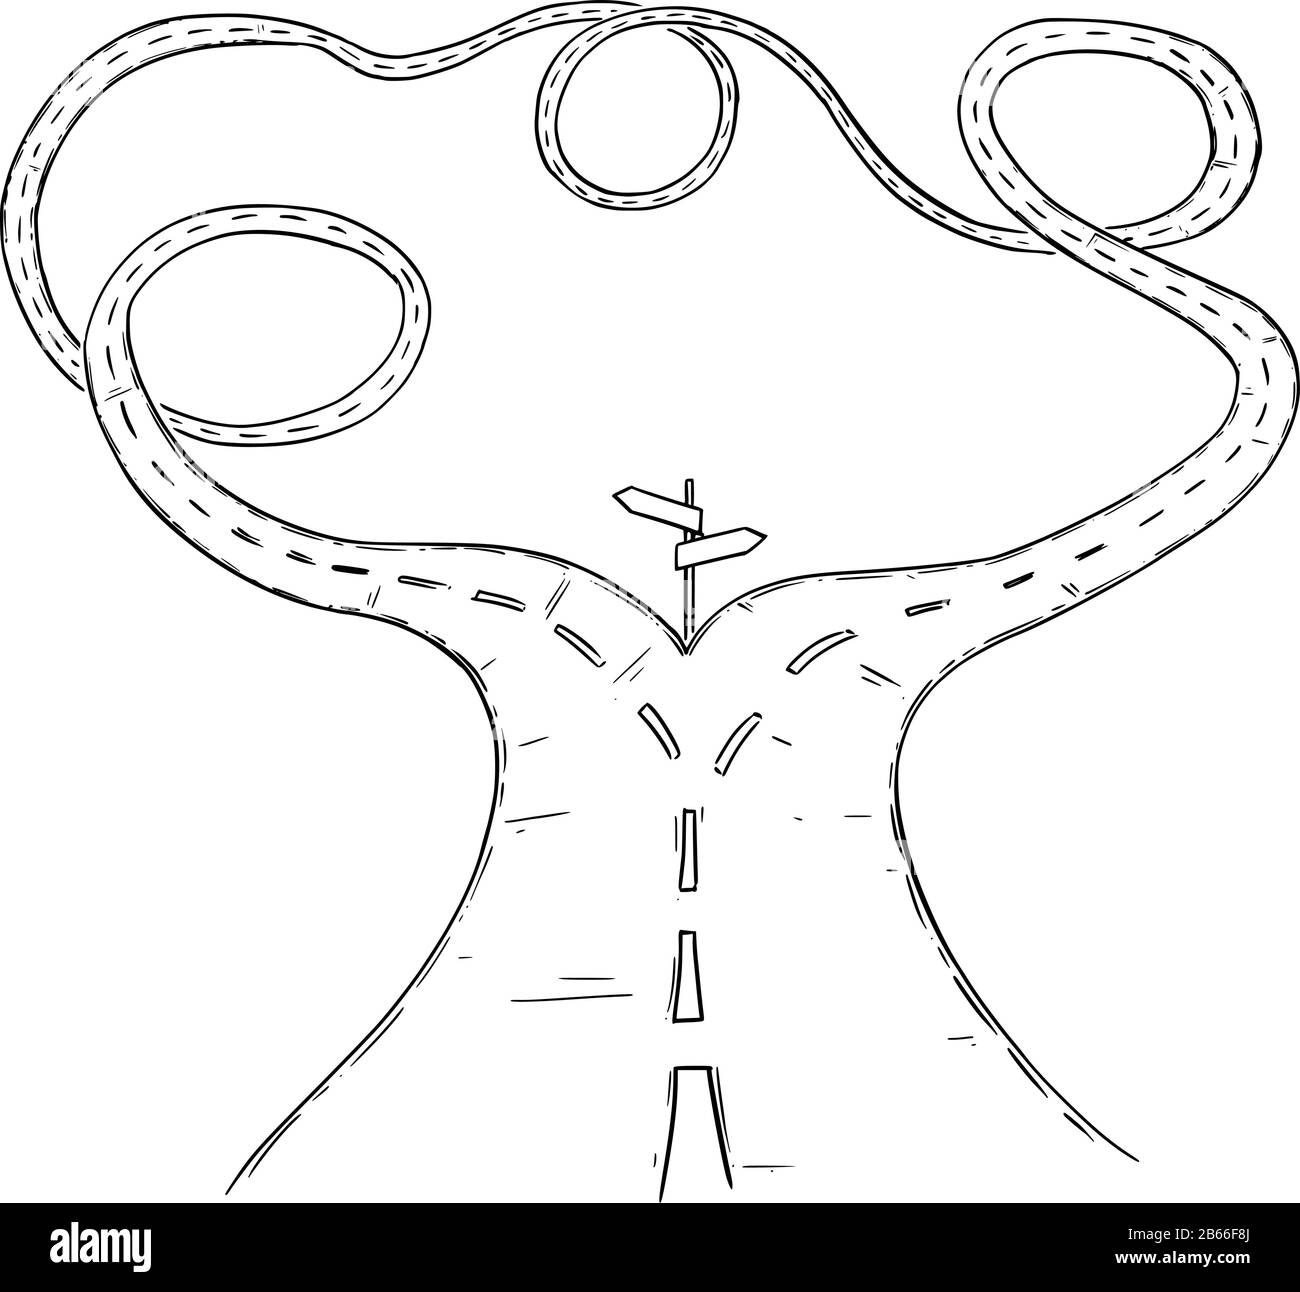 Vector black and white conceptual business drawing or illustration of fork in the road or crossroad, both ways are connected, no decision or real options to choose from. Stock Vector